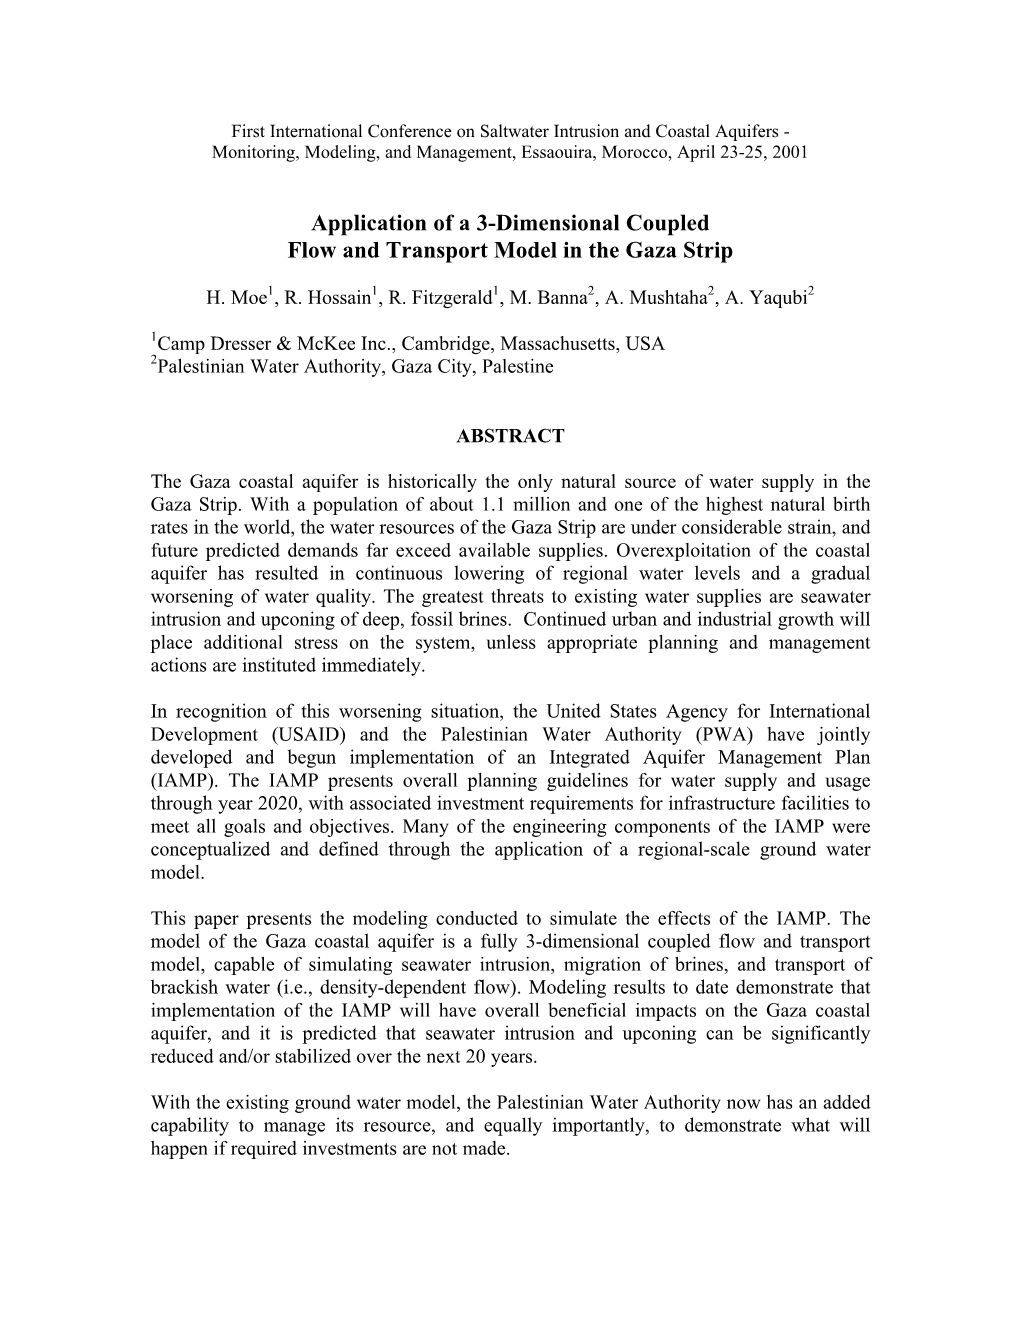 Application of a 3-Dimensional Coupled Flow and Transport Model in the Gaza Strip